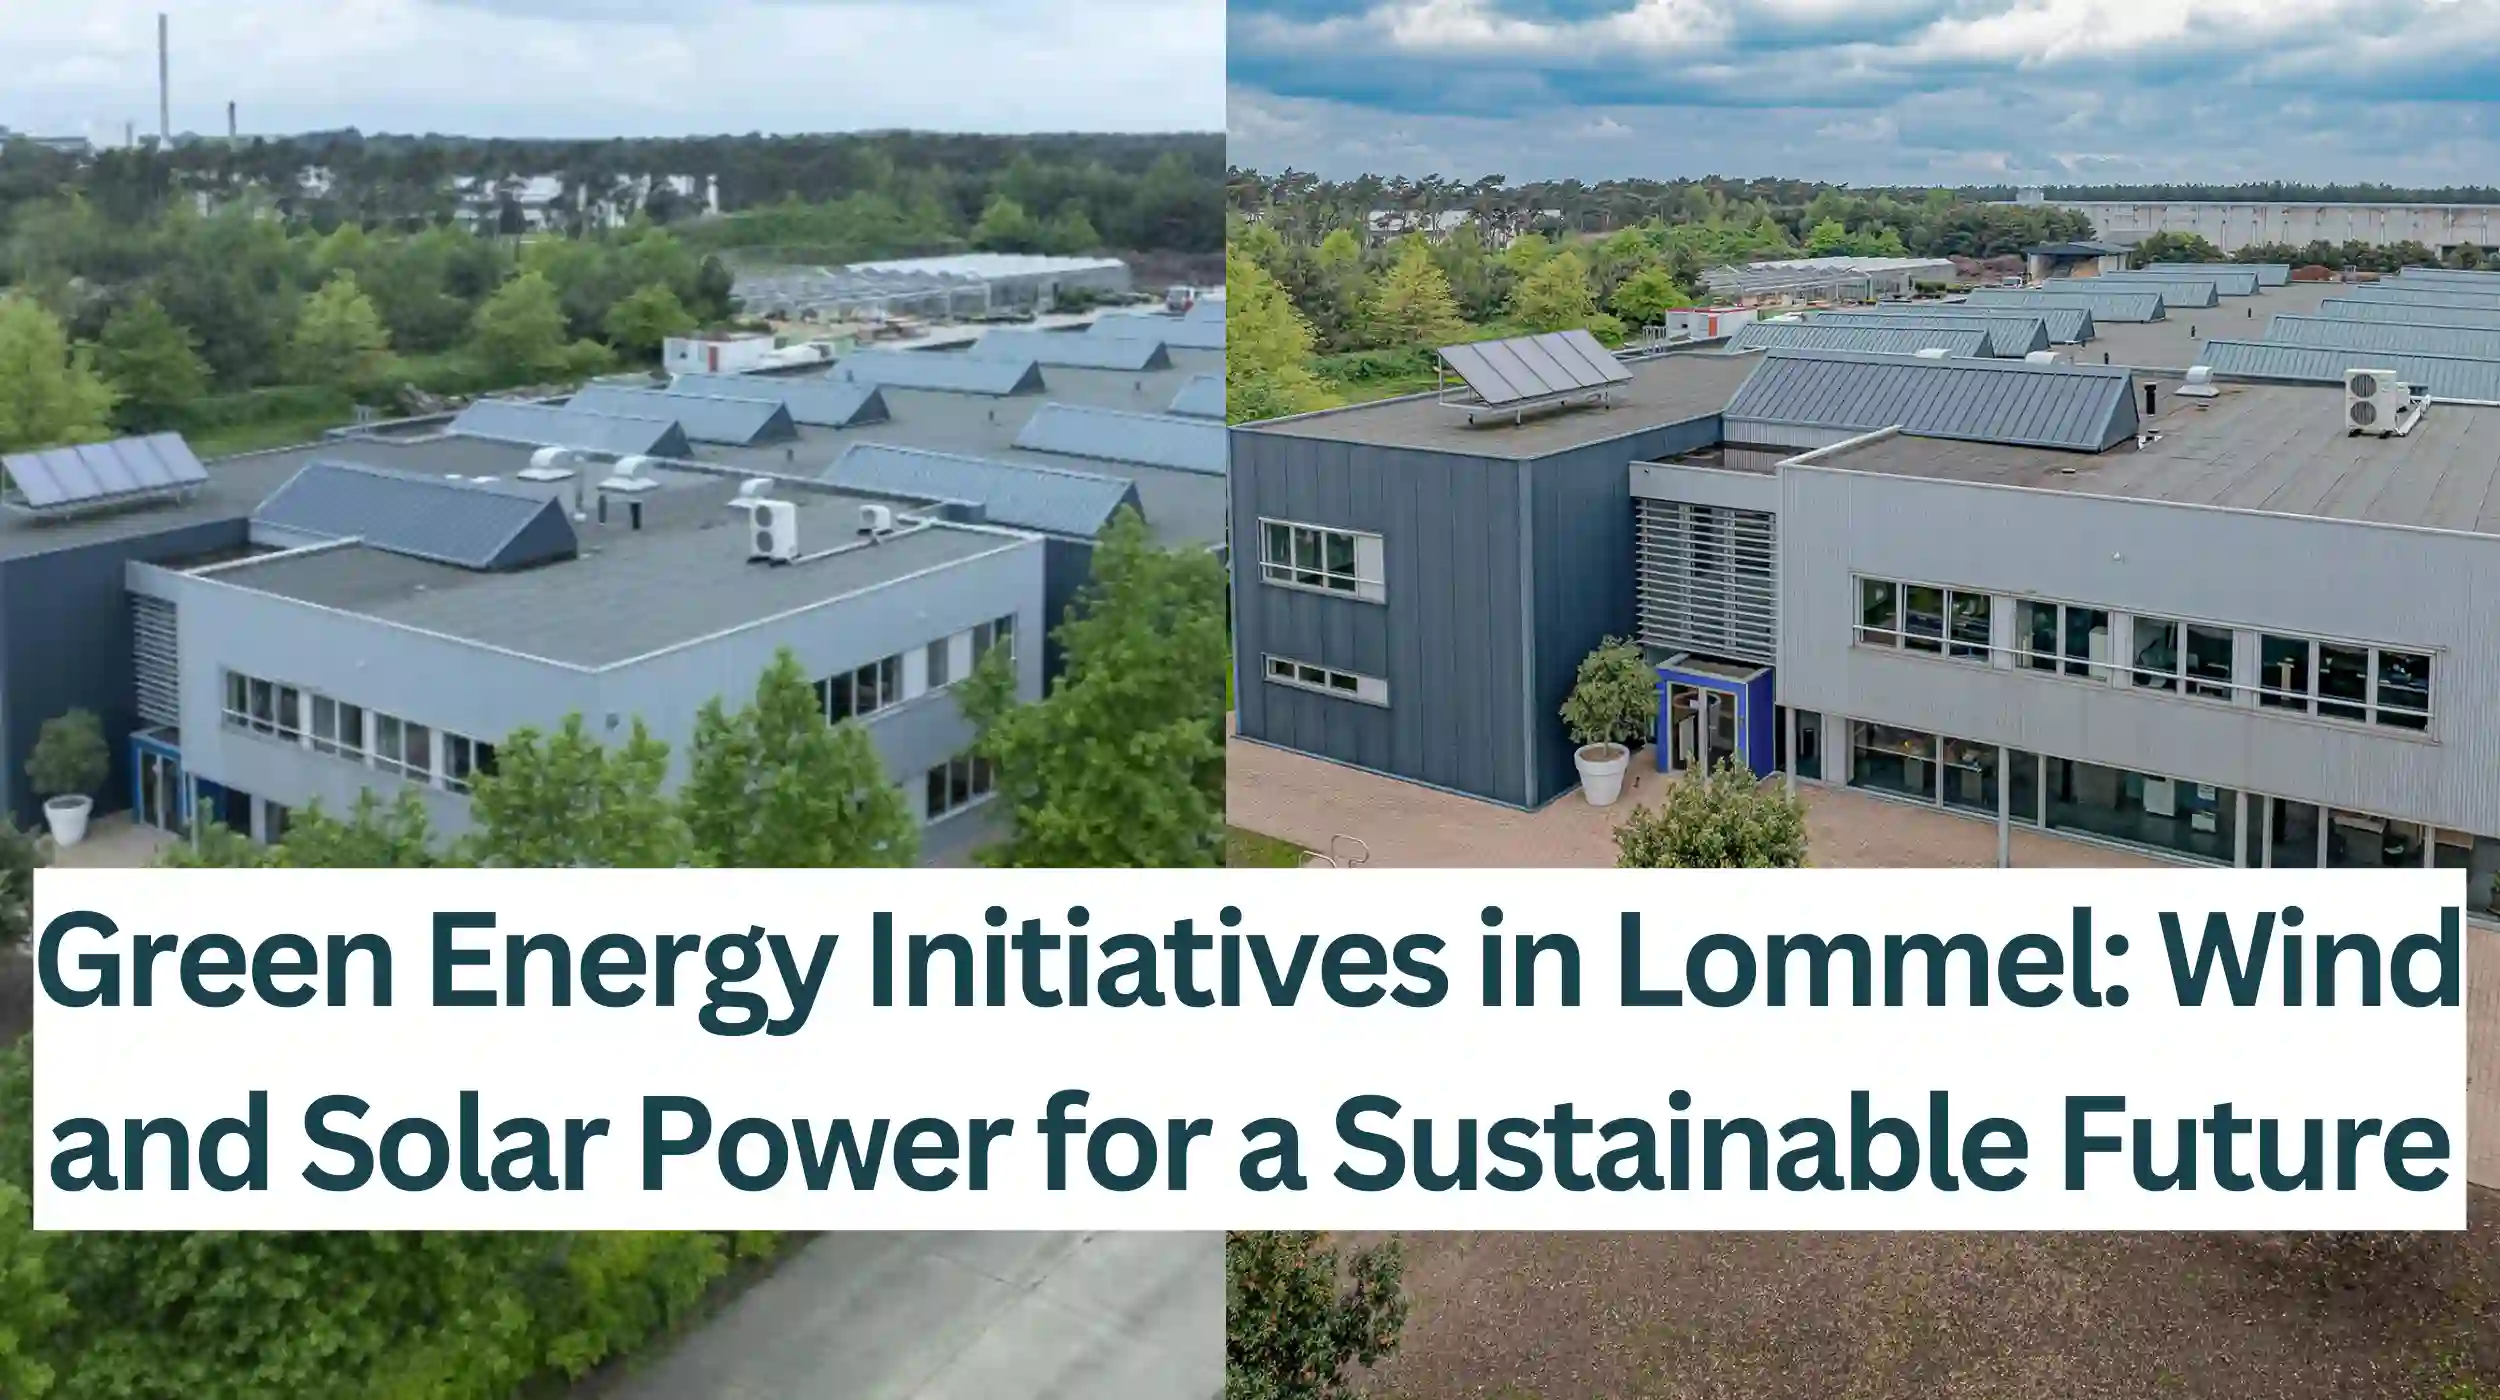 Green-Energy-Initiatives-in-Lommel-Wind-and-Solar-Power-for-a-Sustainable-Future